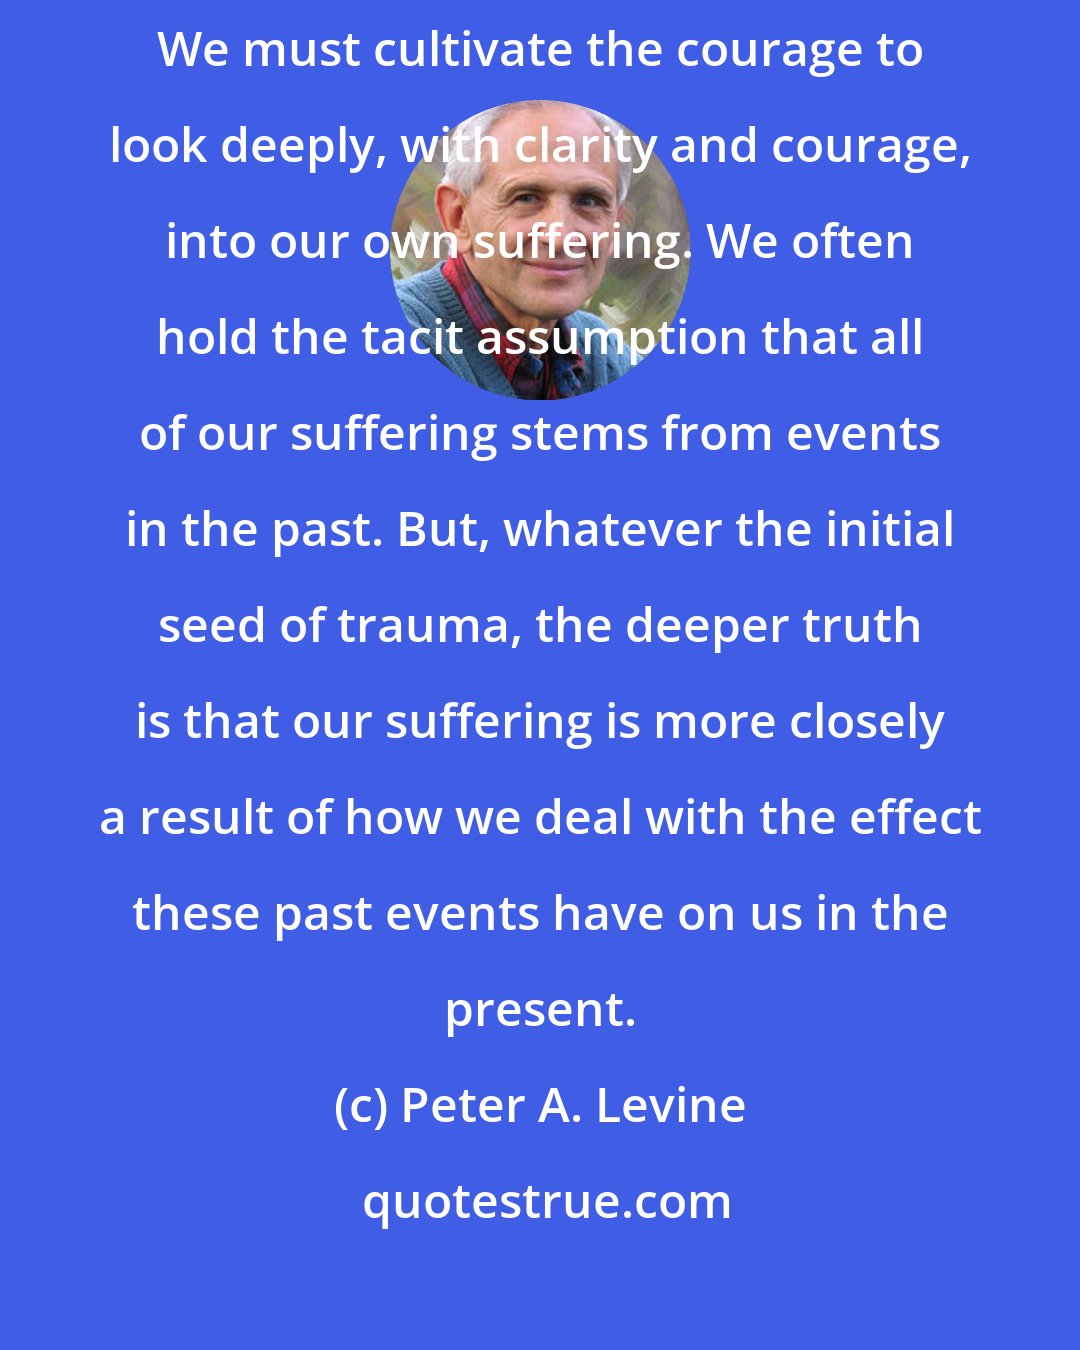 Peter A. Levine: The second noble truth states that we must discover why we are suffering. We must cultivate the courage to look deeply, with clarity and courage, into our own suffering. We often hold the tacit assumption that all of our suffering stems from events in the past. But, whatever the initial seed of trauma, the deeper truth is that our suffering is more closely a result of how we deal with the effect these past events have on us in the present.